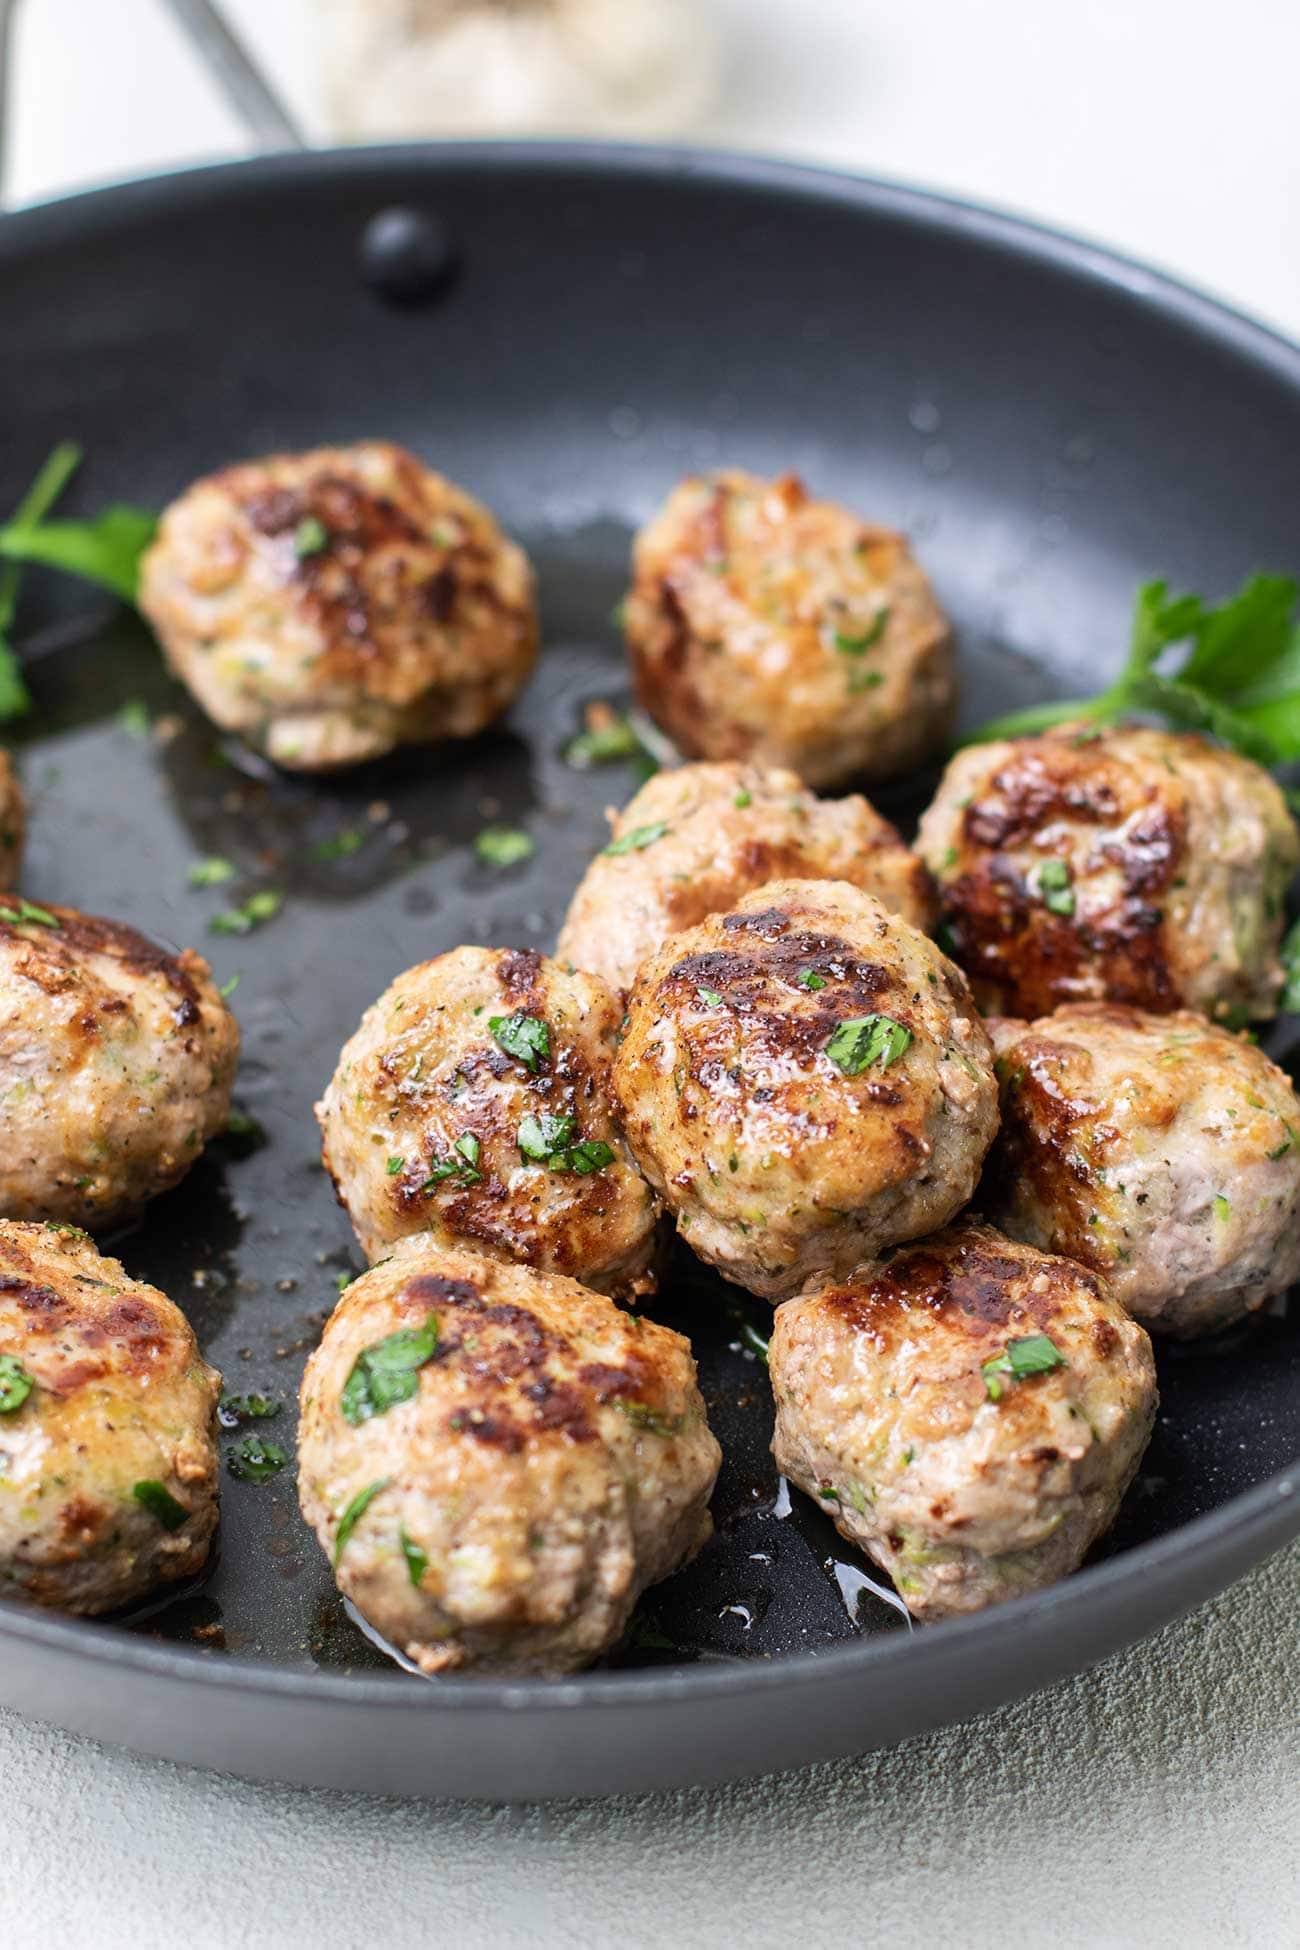 A stack of low carb meatballs shown in a skillet.